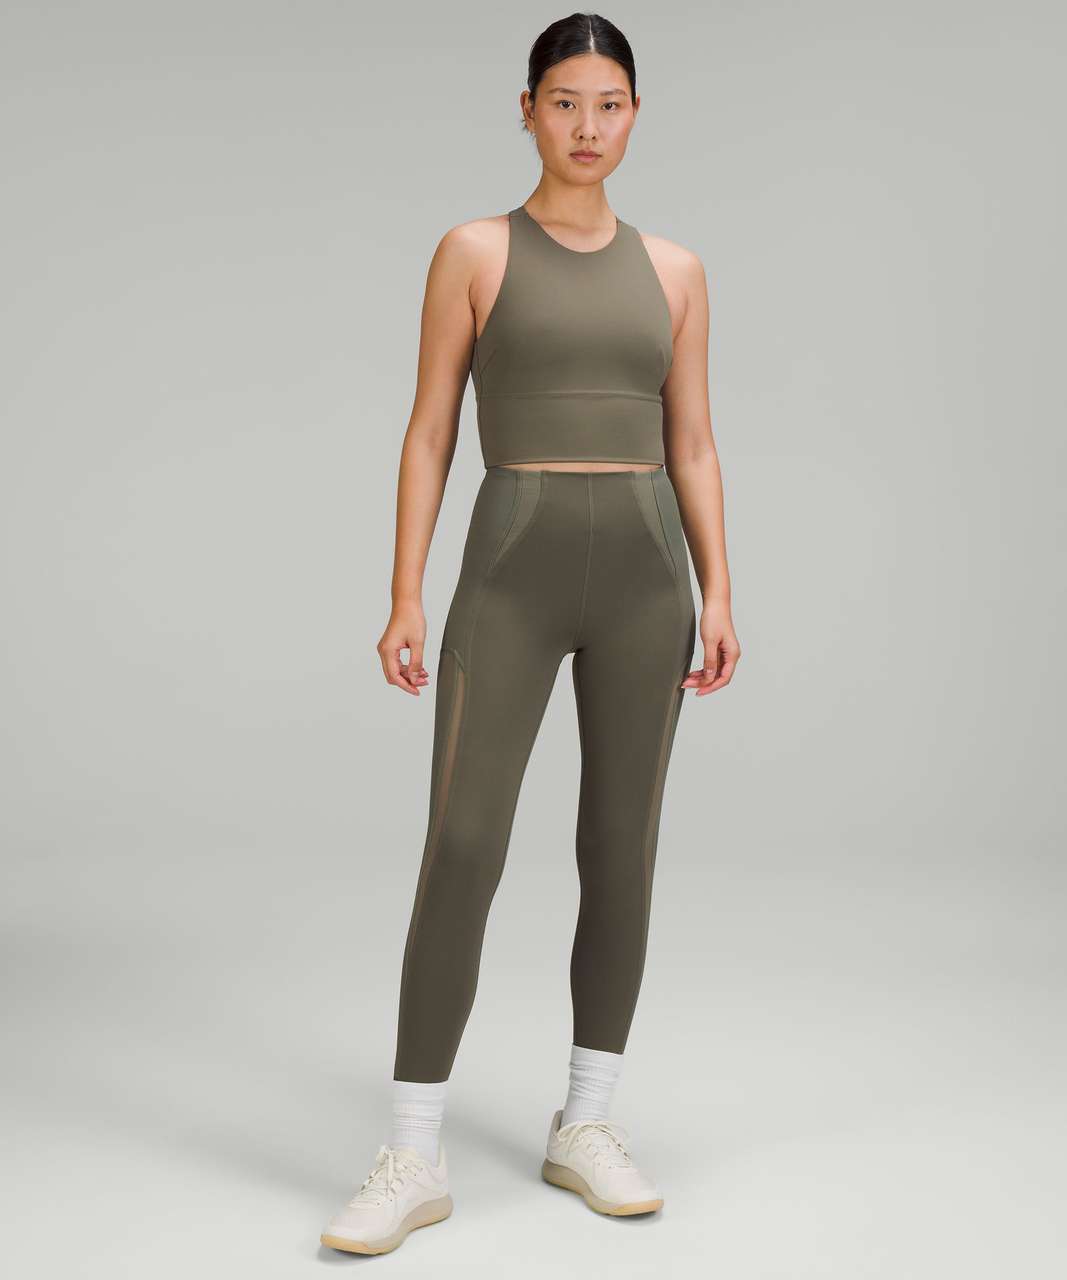 Pet Owners: Thoughts on SmoothCover vs Luxtreme vs Everlux? : r/lululemon